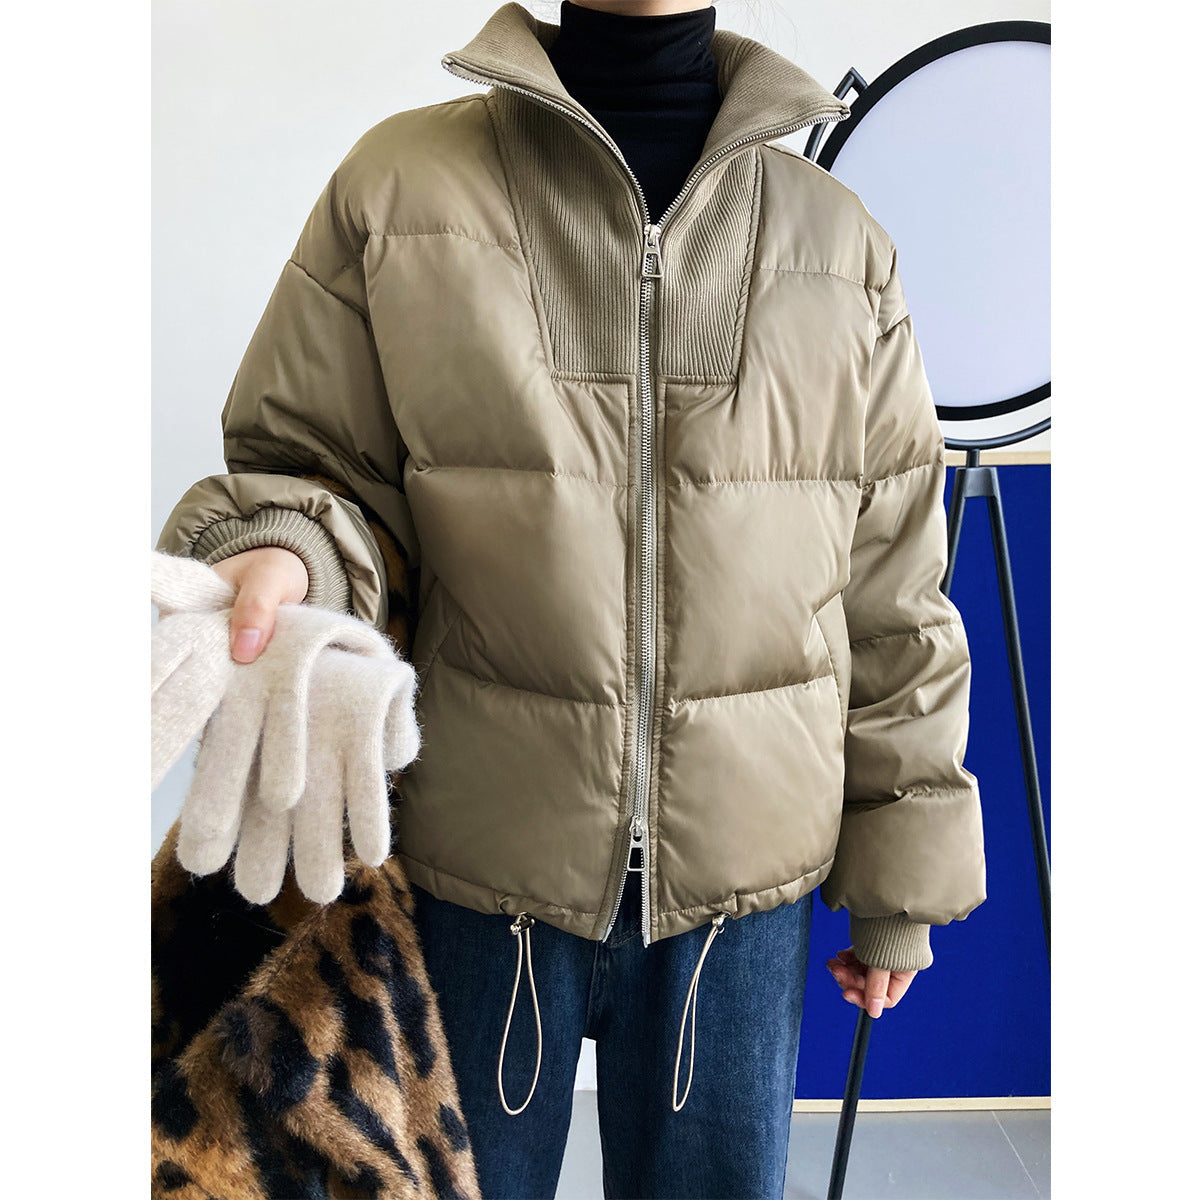 Stand Collar Short down Jacket Women Small White Duck down Coat